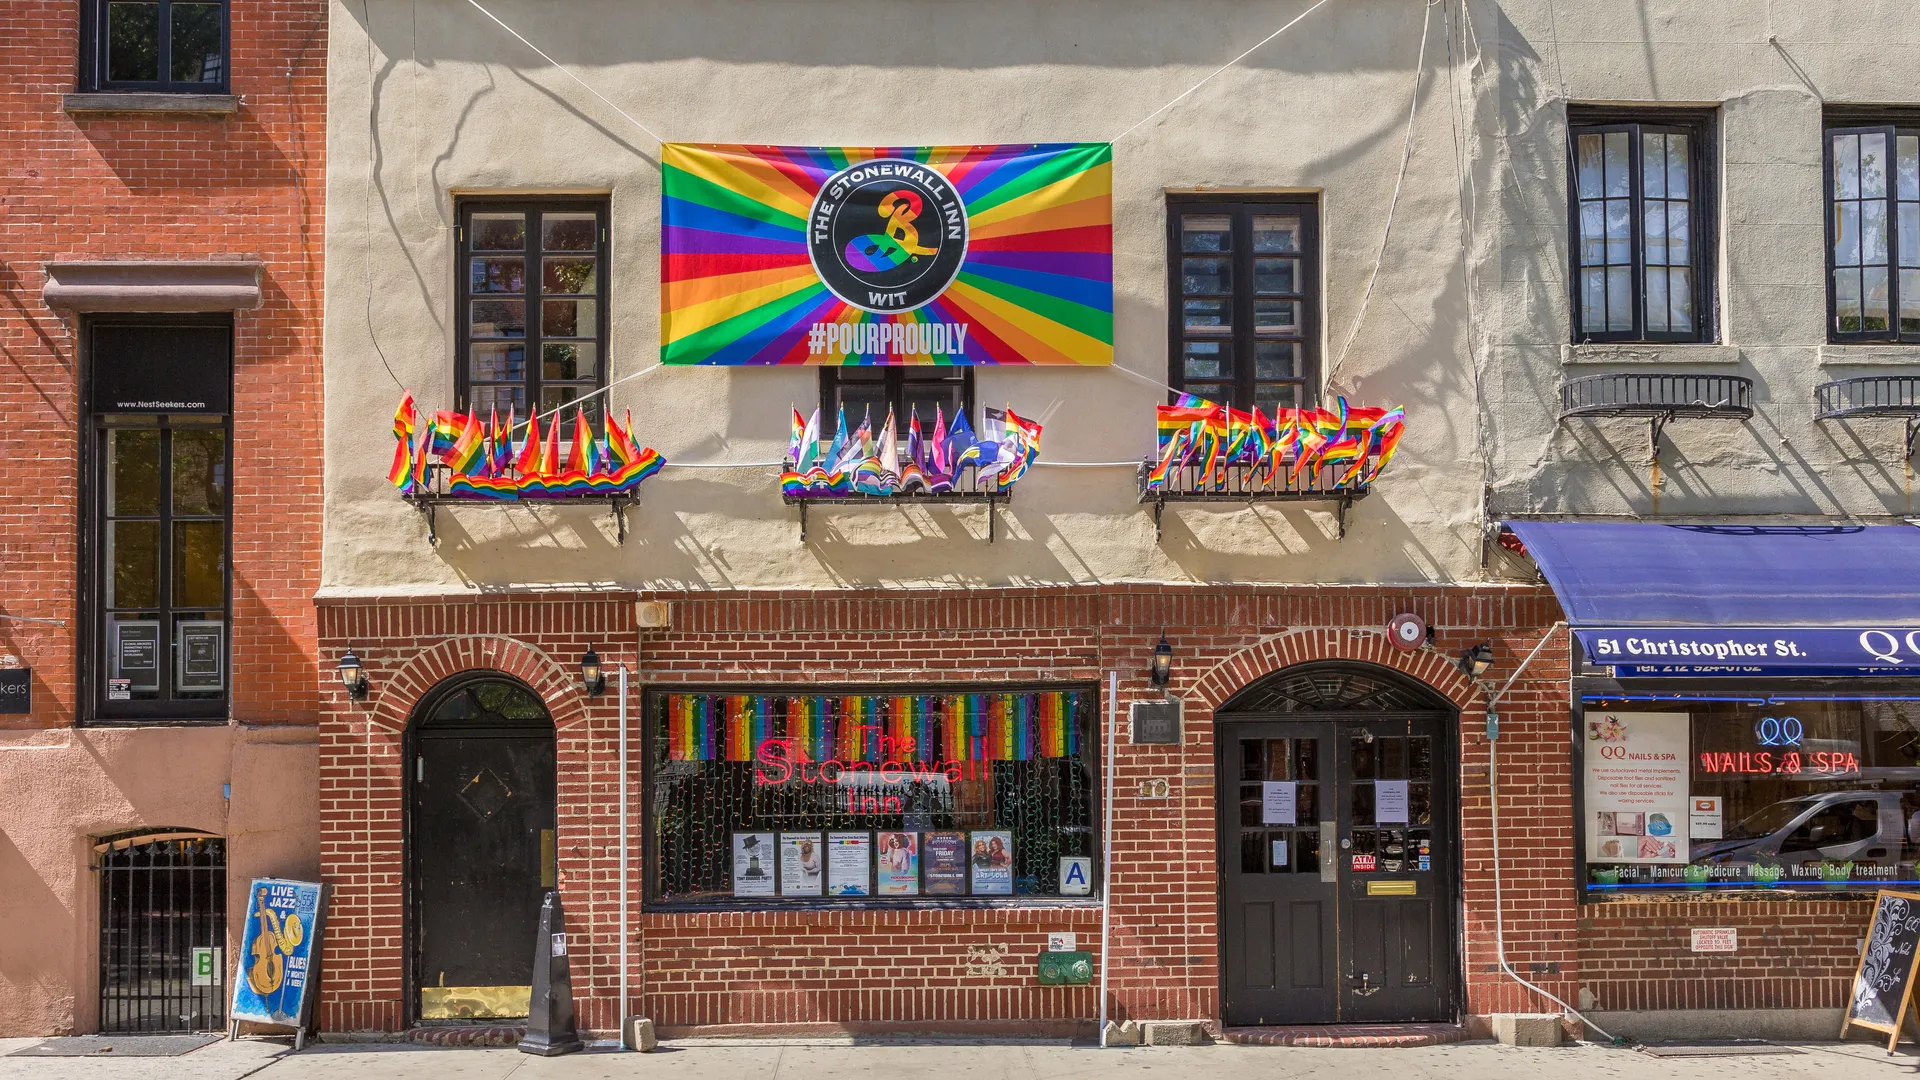 Your Guide To The Top 10 LGBTQ+ Bars In NYC